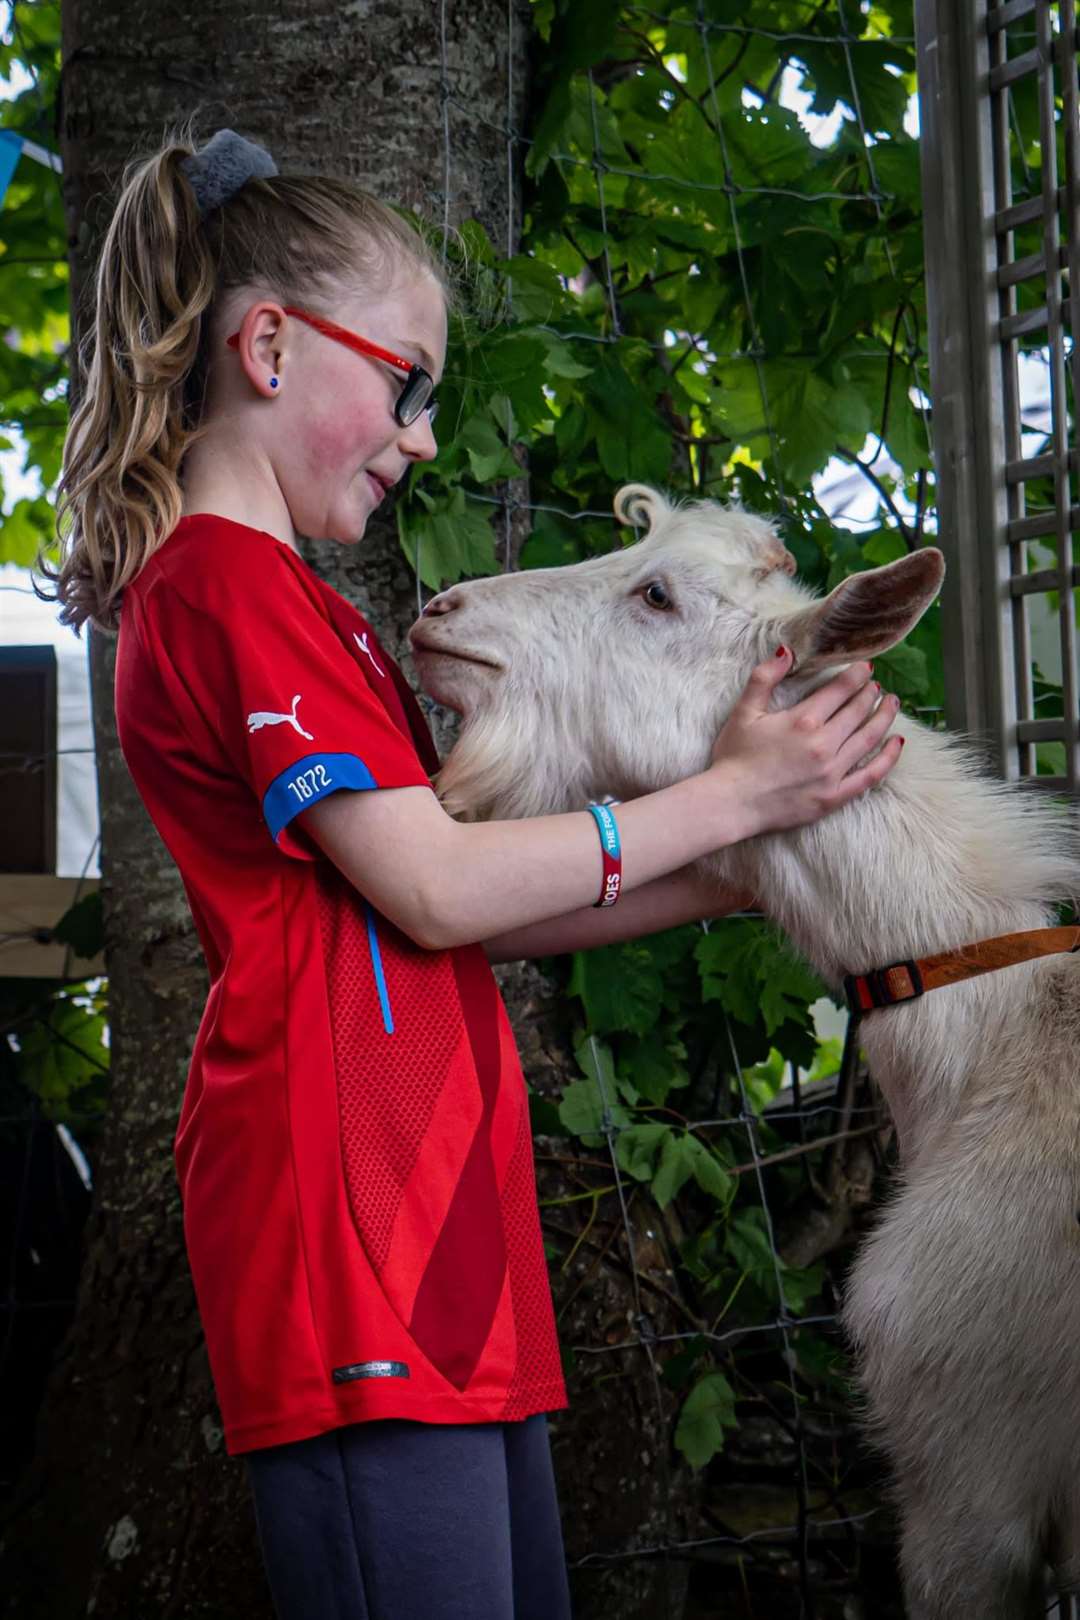 Mhairi Kirk of MK Melts was among those who took the chance to have a picture taken with a goat during the charity event in Wick. Picture: Richard Lawrence